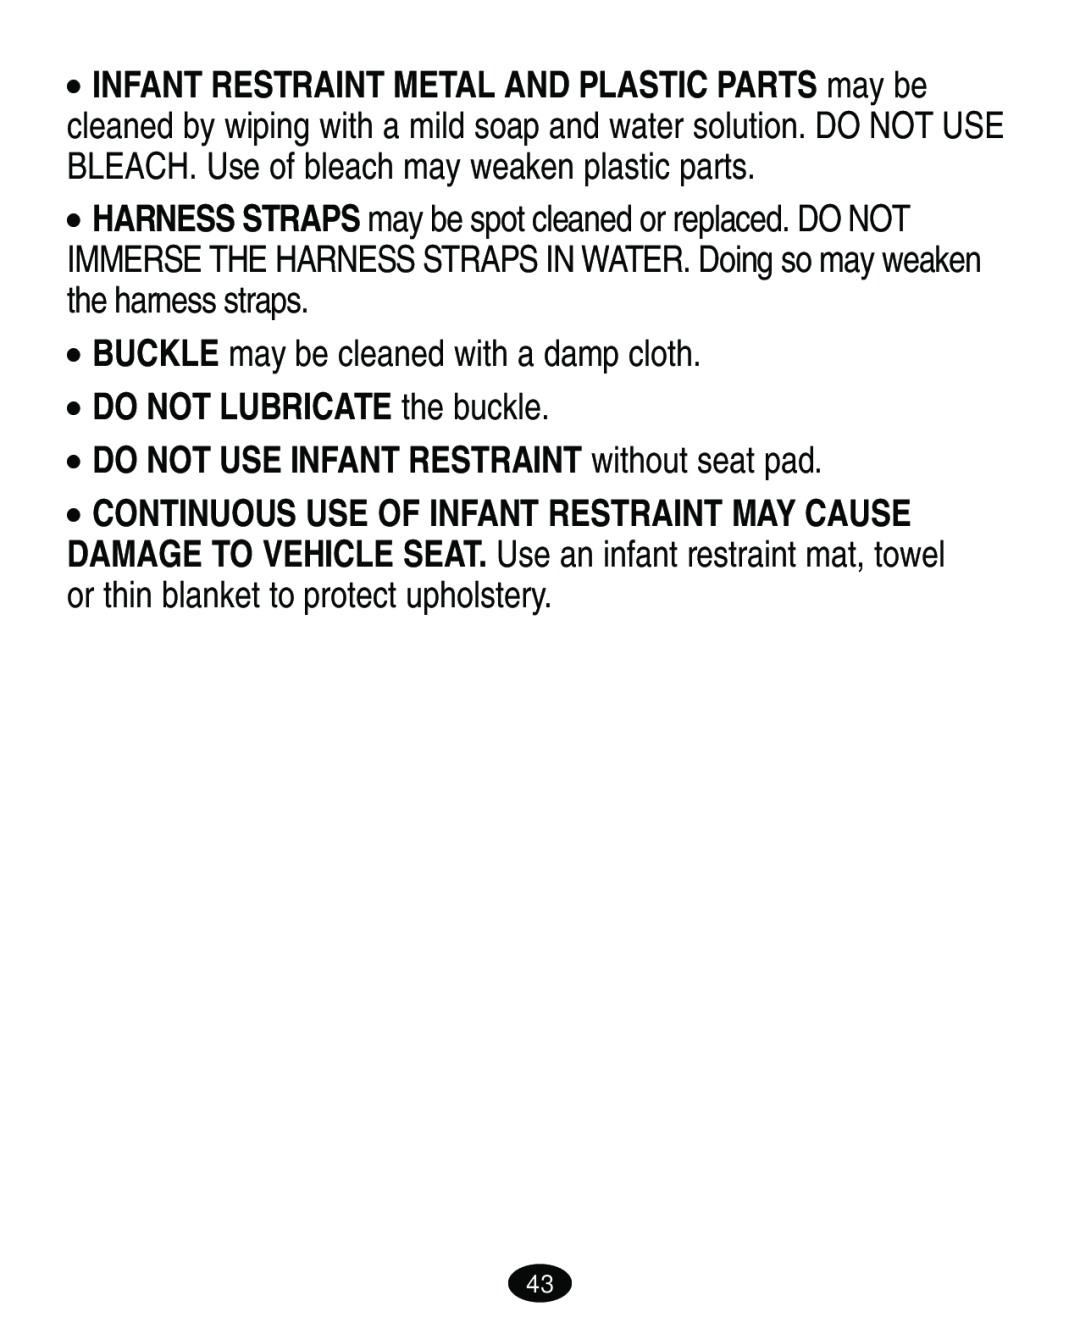 Graco ISPA109AC manual BUCKLE may be cleaned with a damp cloth, DO NOT LUBRICATE the buckle 